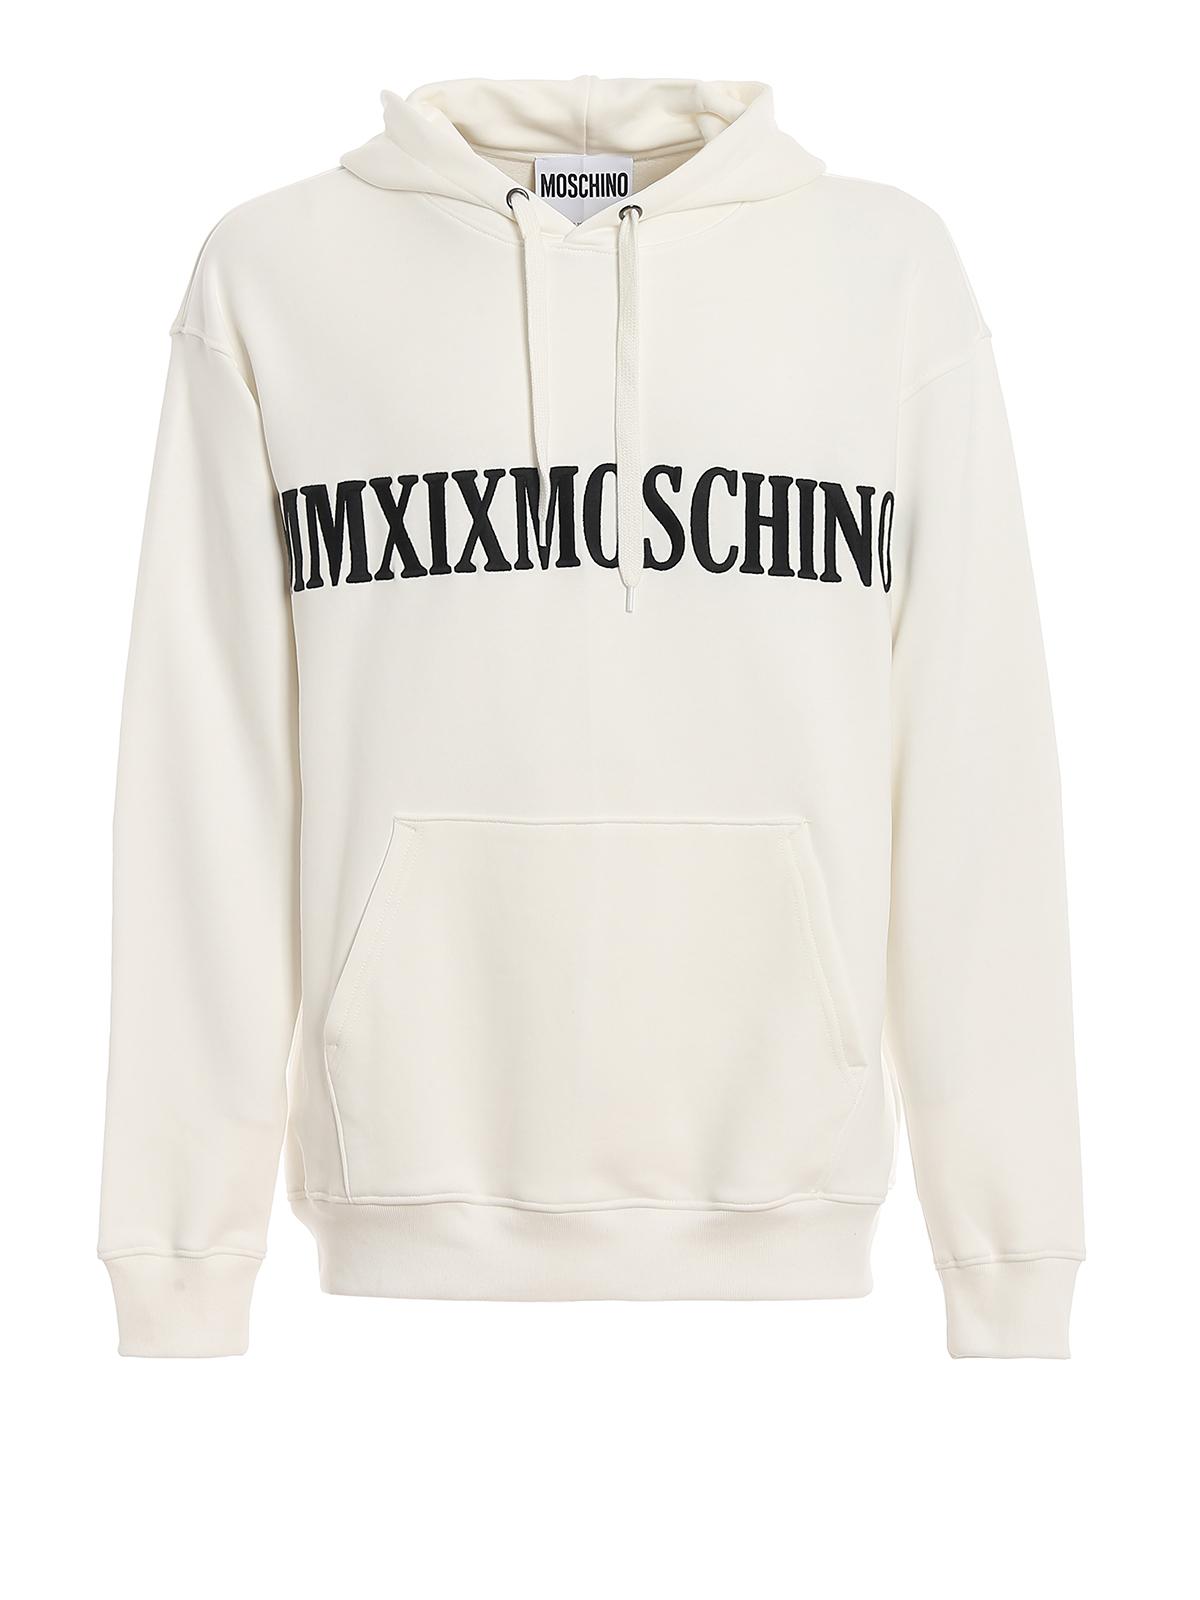 Moschino Cotton Mmxix Embroidered Hoodie in White - Save 8% - Lyst